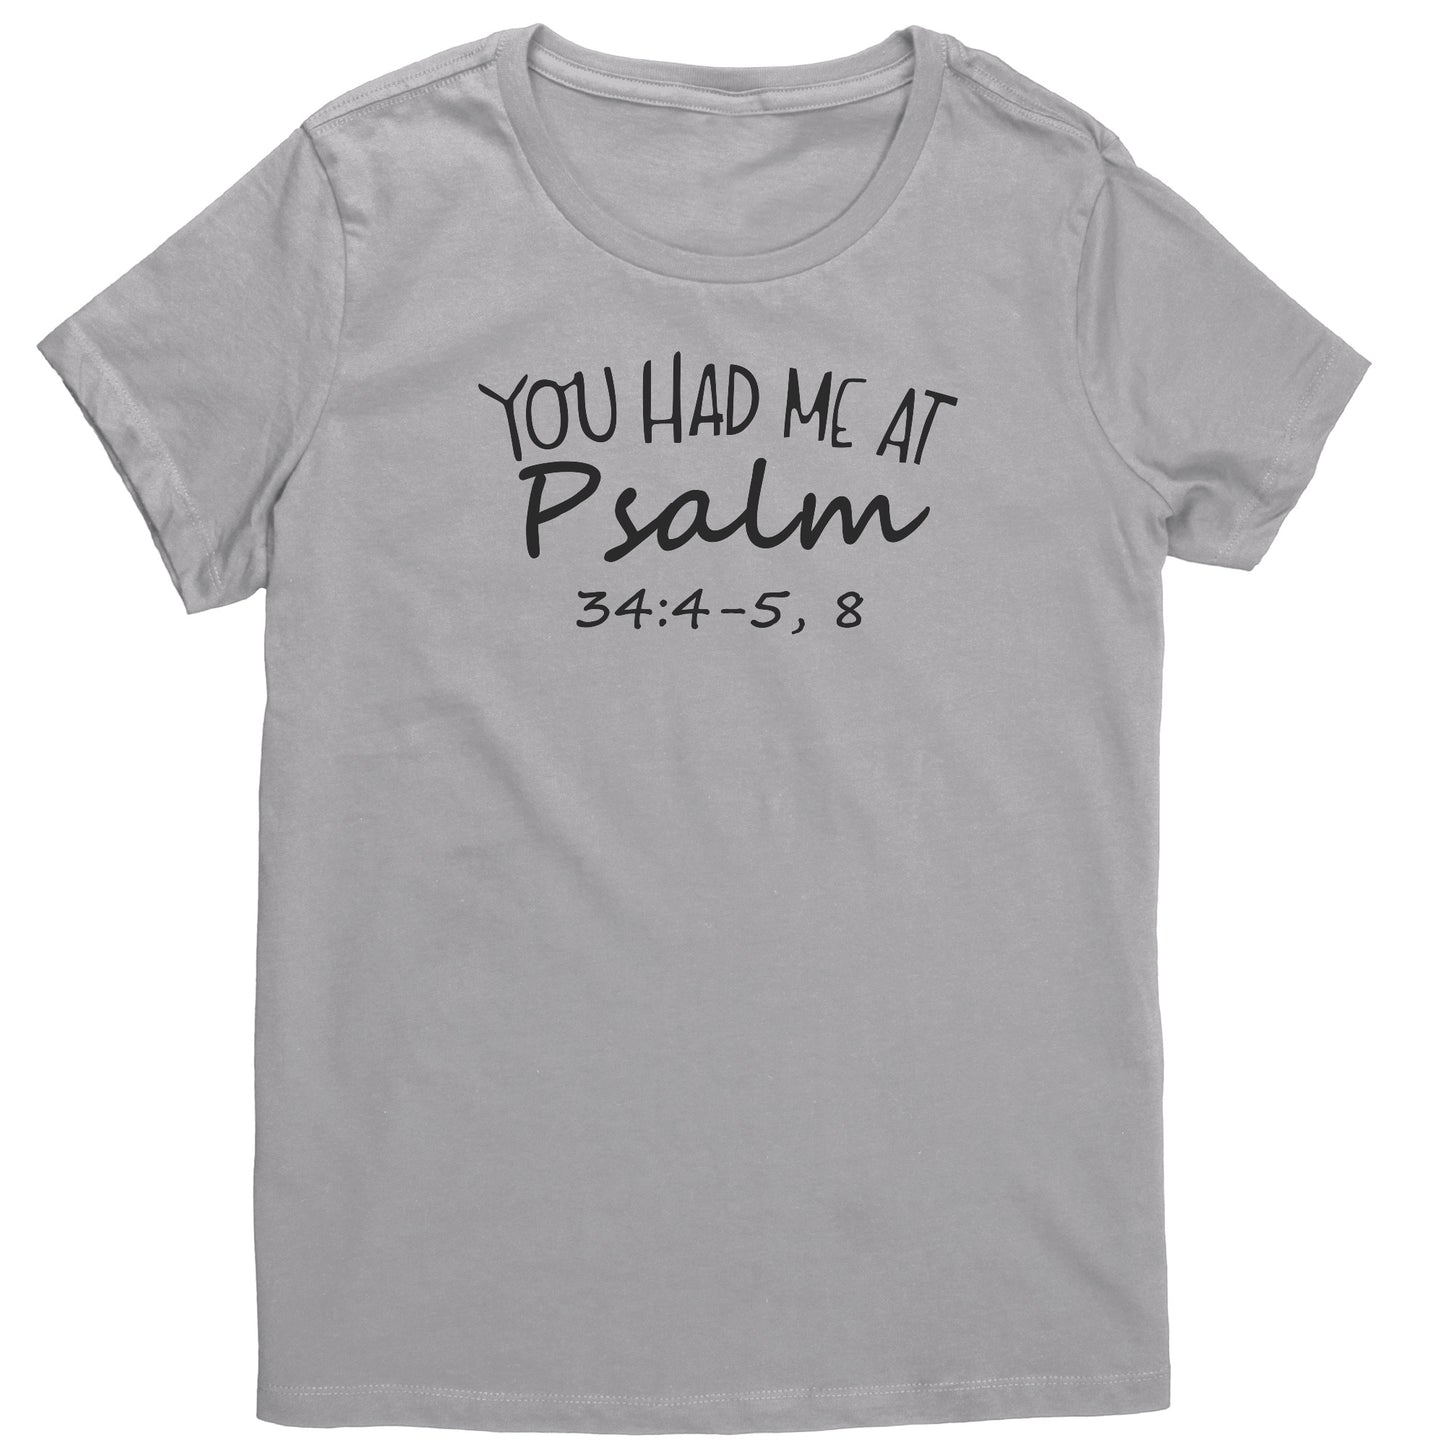 You Had Me At Psalm 34:4-5, 8 Women's T-Shirt Part 1